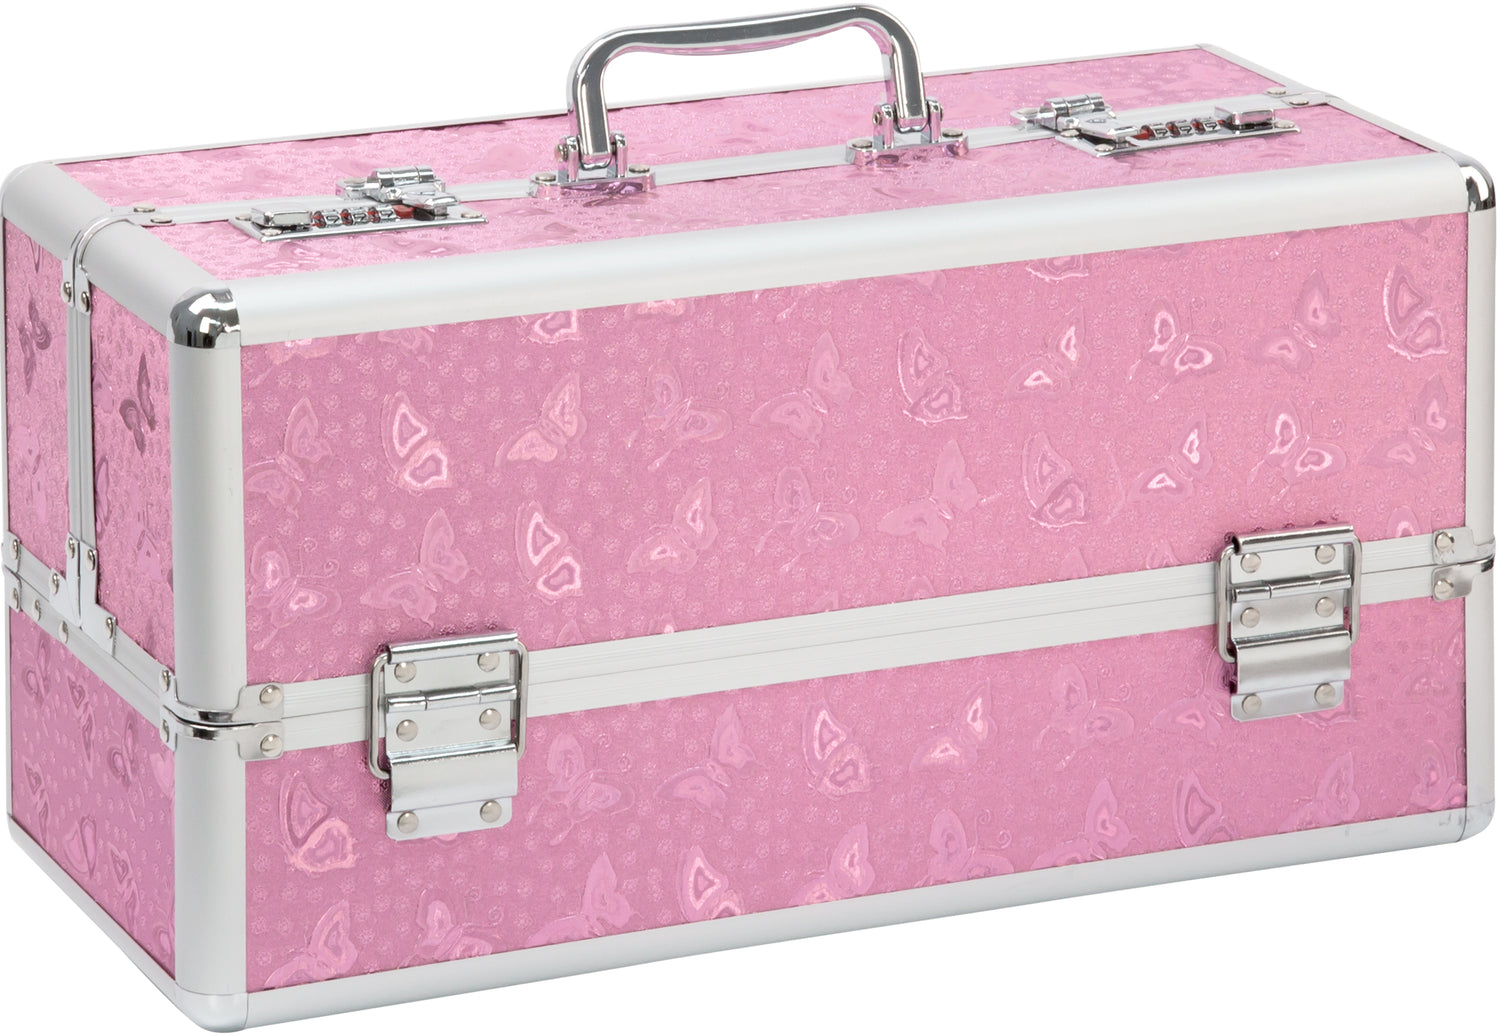 Lockable Large Vibrator Case Pink - Just for you desires